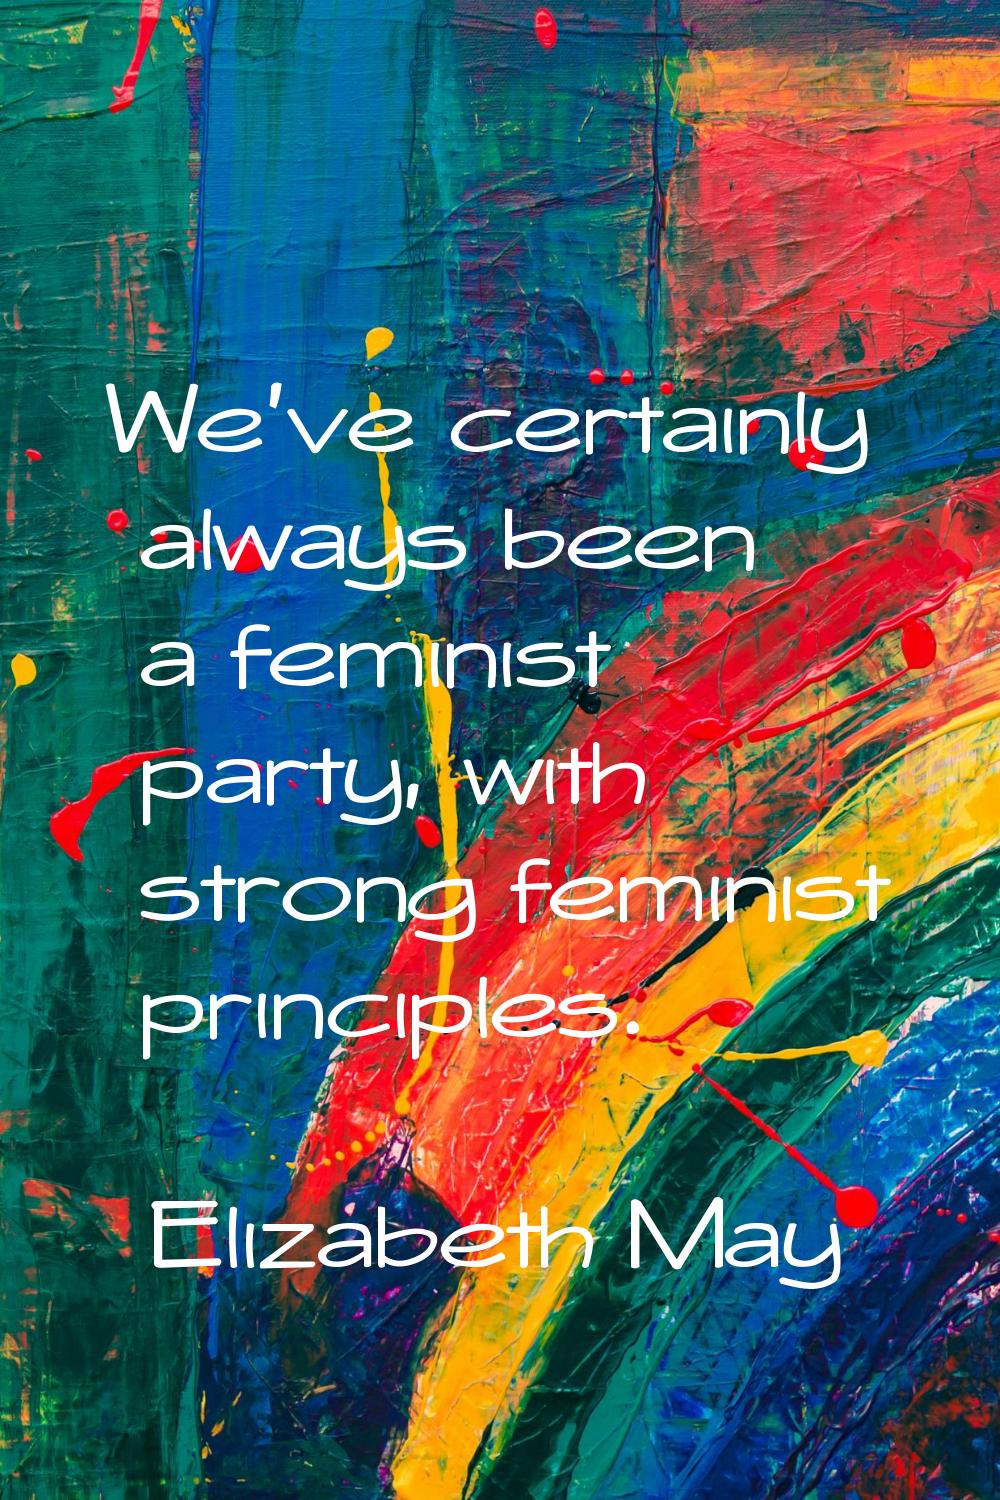 We've certainly always been a feminist party, with strong feminist principles.